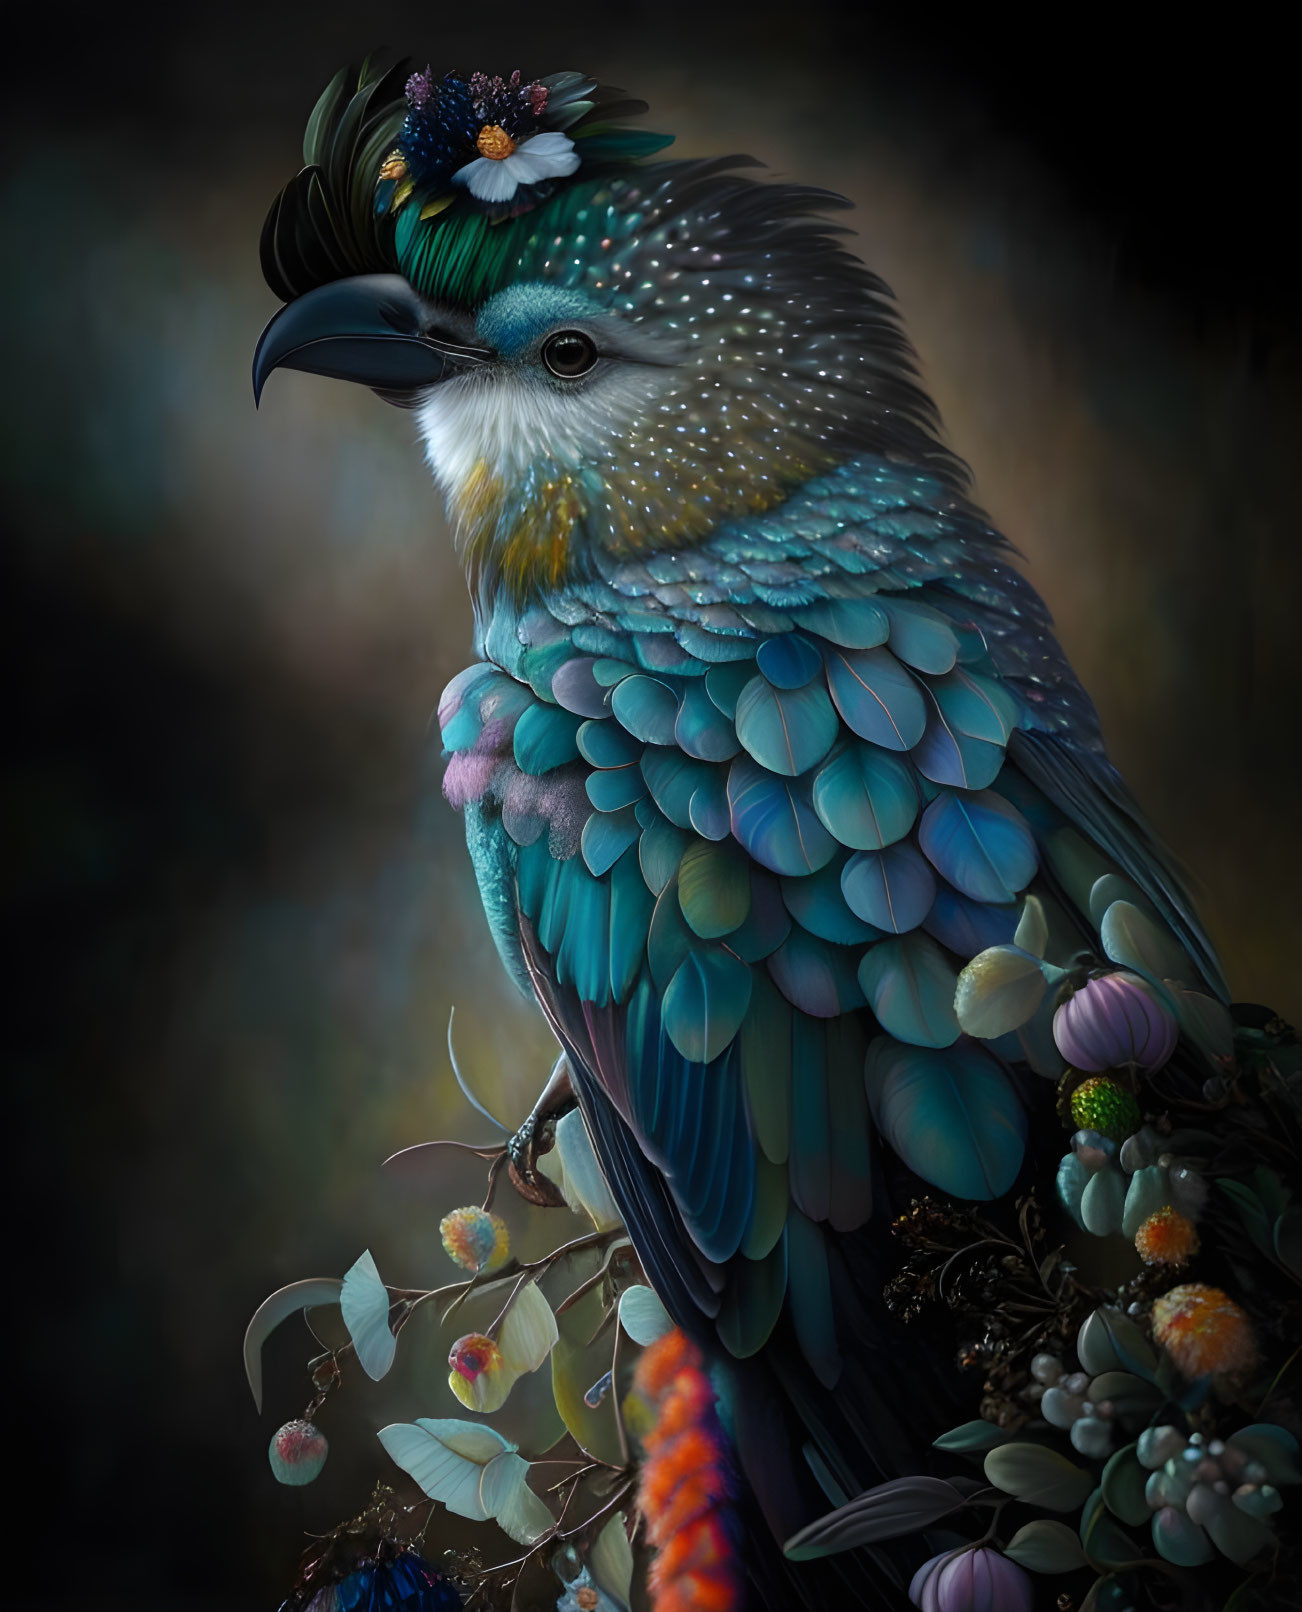 Colorful Fantastical Bird with Blue and Green Feathers Perched in Floral Setting